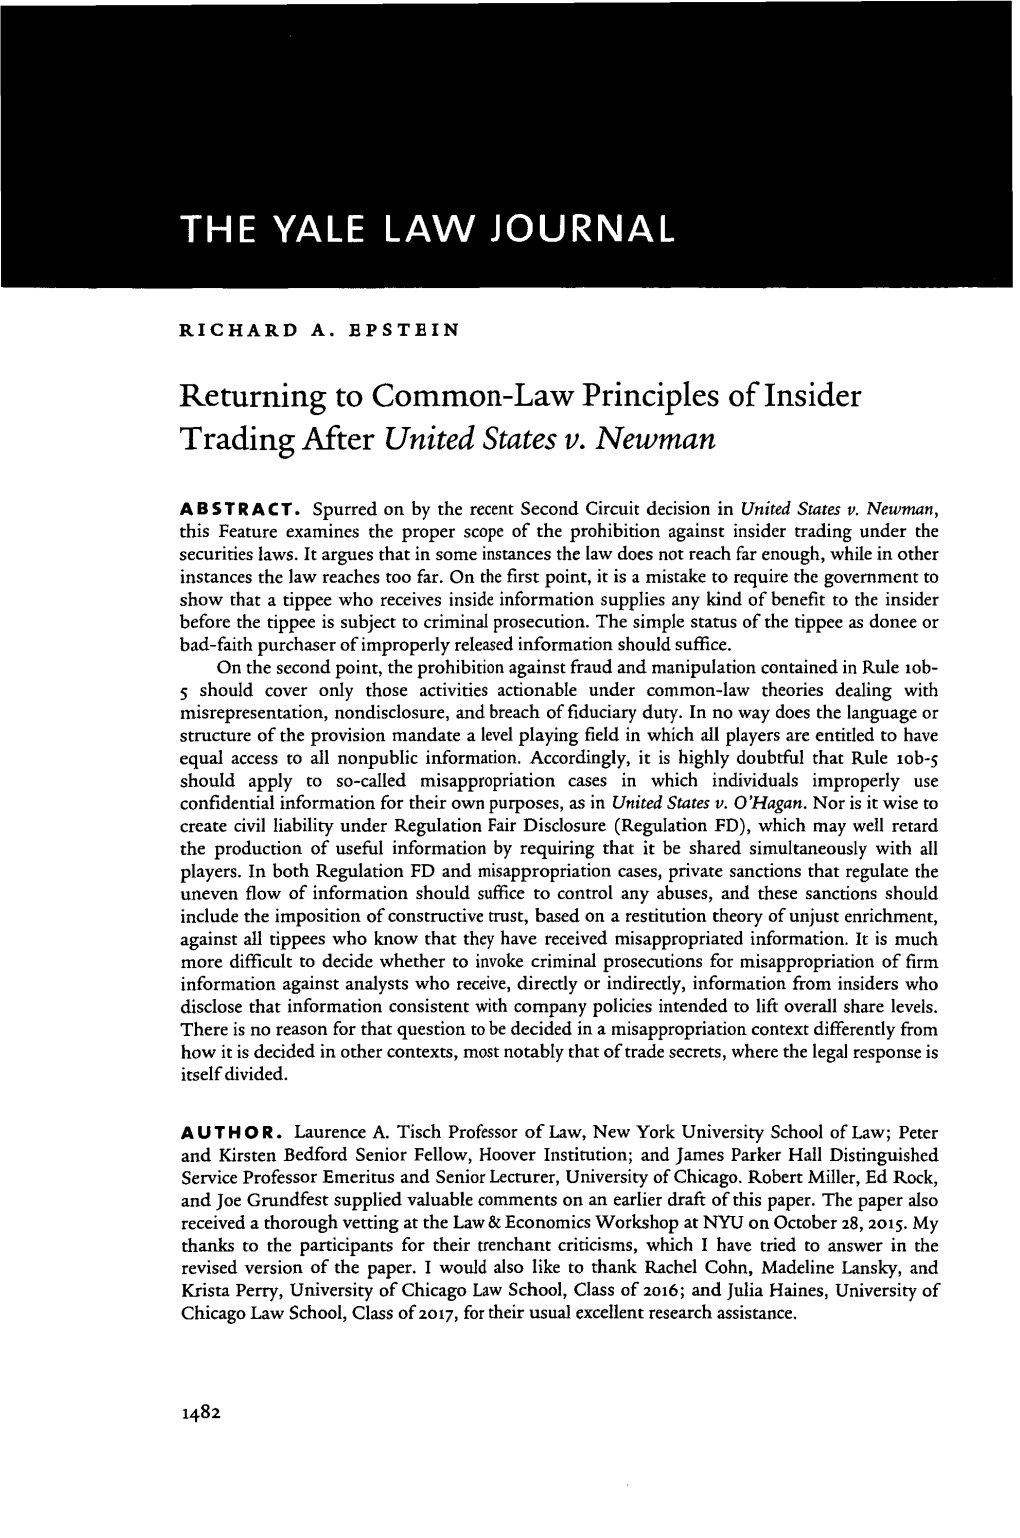 Returning to Common-Law Principles of Insider Trading After United States V